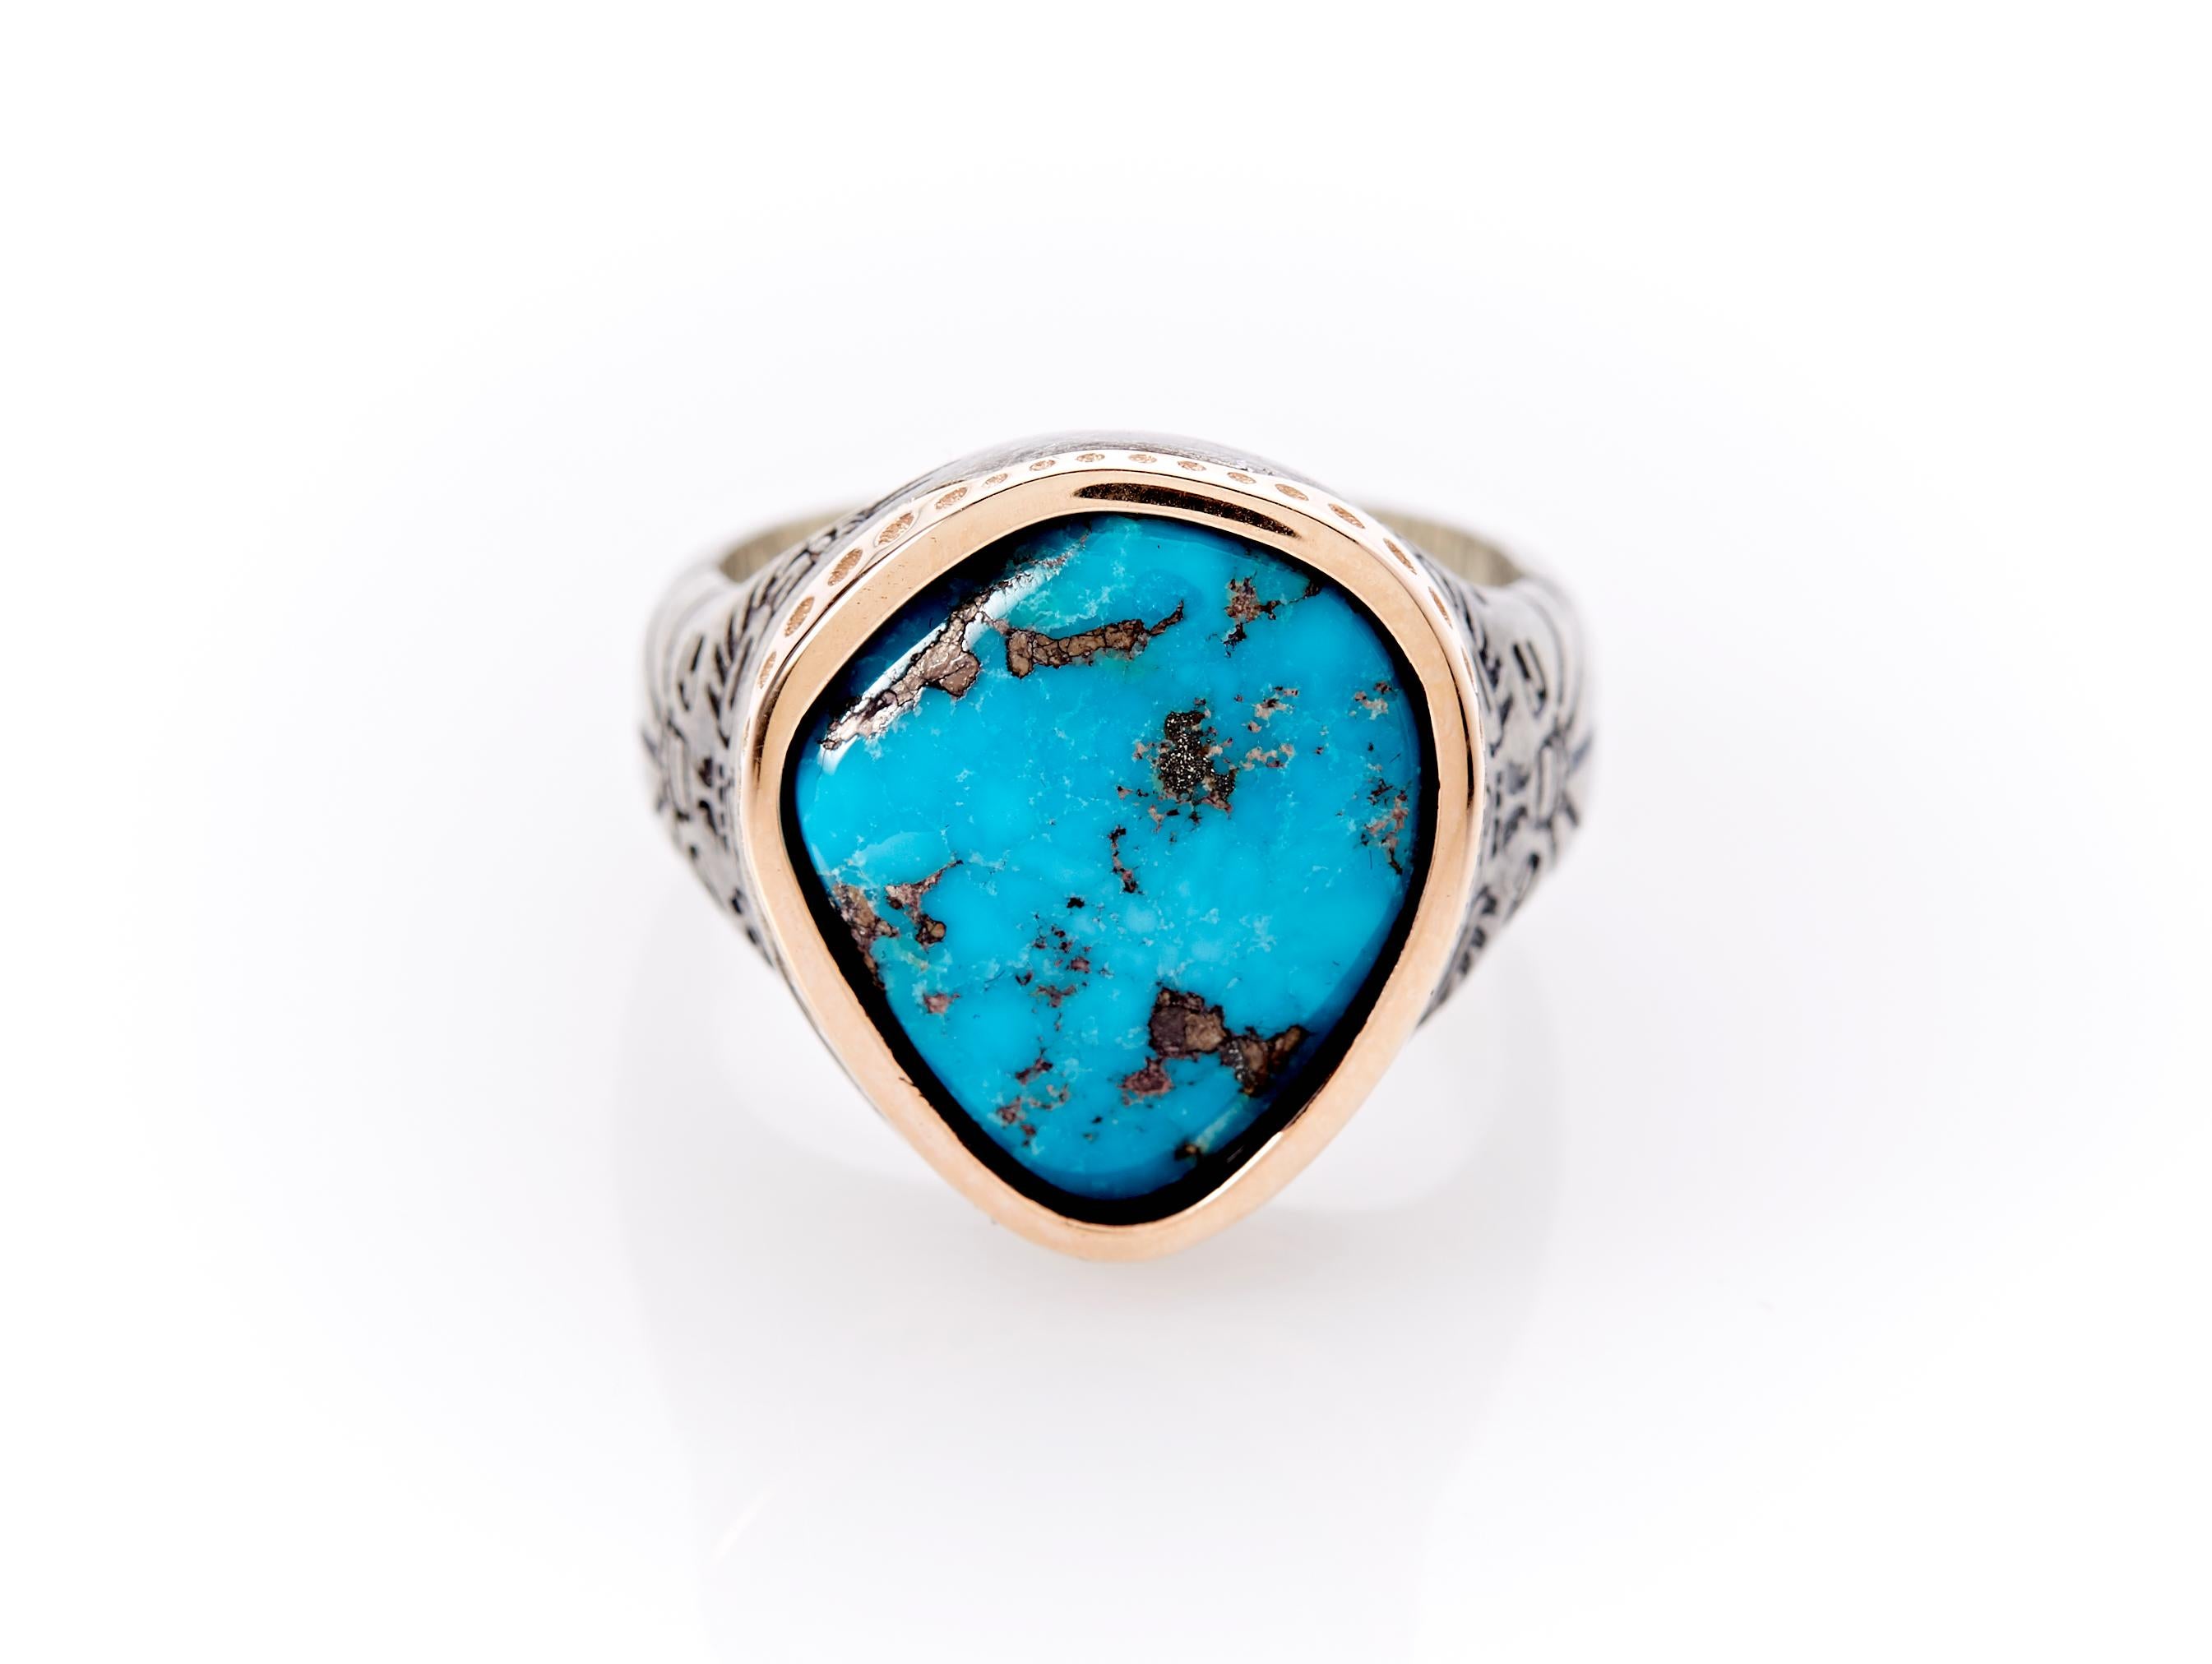 One of a kind Thunderbird 18ct Rose Gold and Oxidized Sterling Silver Morenci Turquoise Ring by Harlin Jones of New York. This unisex features exquisite craftsmanship but styling thats easy to wear everyday. 

Ring details:
-18ct rose gold
-Oxidized